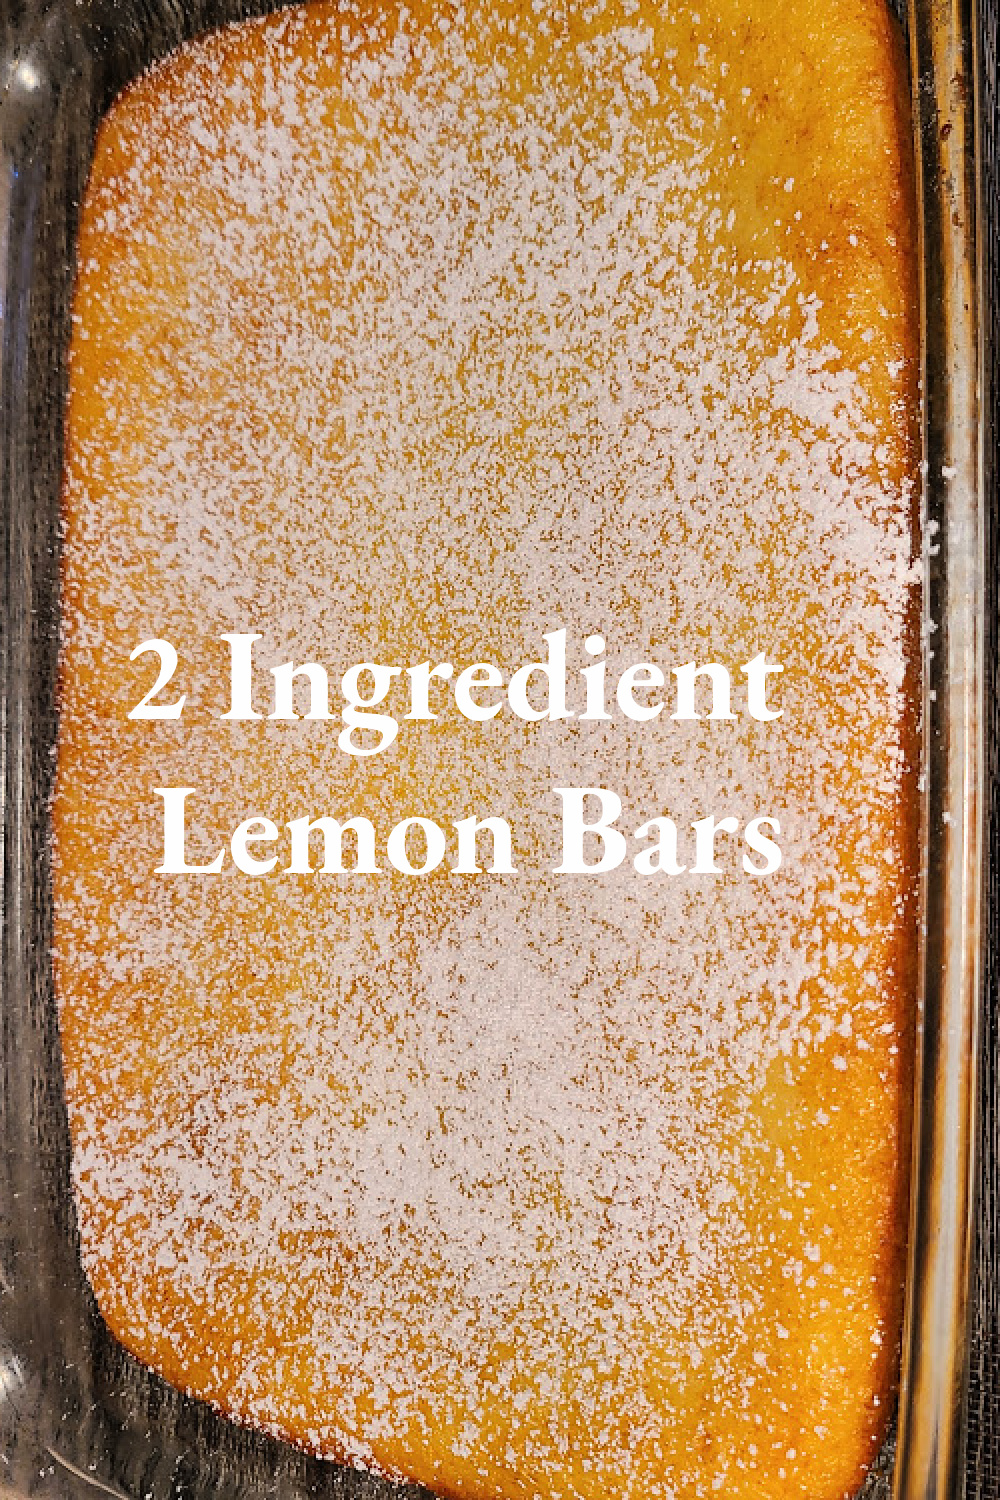 This easy 2 Ingredient Lemon Bars Recipe uses just a lemon pie filling and angel food cake mix! Top with a bit of powdered sugar and serve! These are easy to make for a brunch or a potluck as well!! No need to measure or use eggs to make!